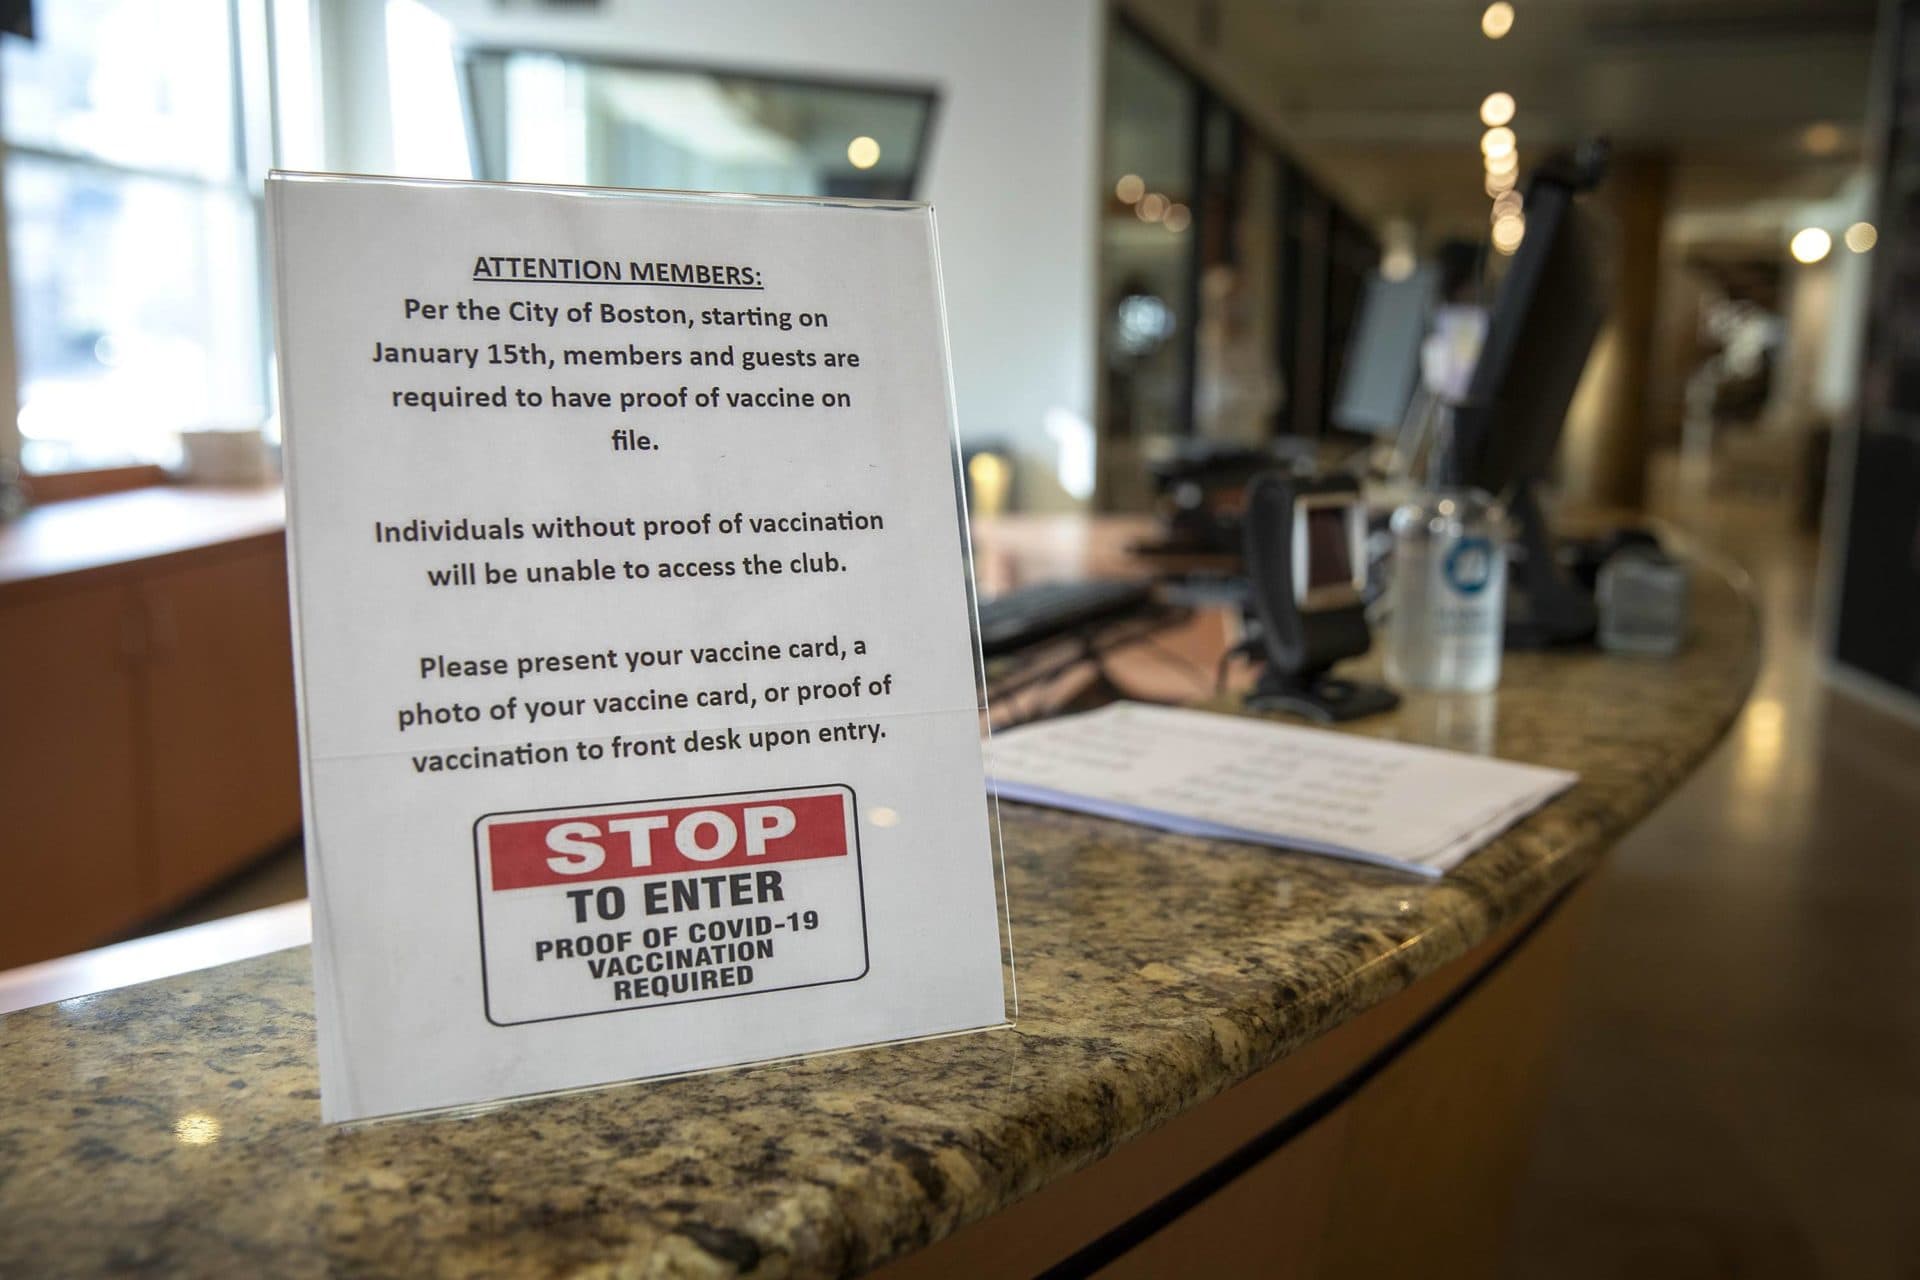 Healthworks on Stuart Street displays a sign informing members they must have proof of COVID-19 vaccination to enter the club, starting on January 15, 2022. (Robin Lubbock/WBUR)